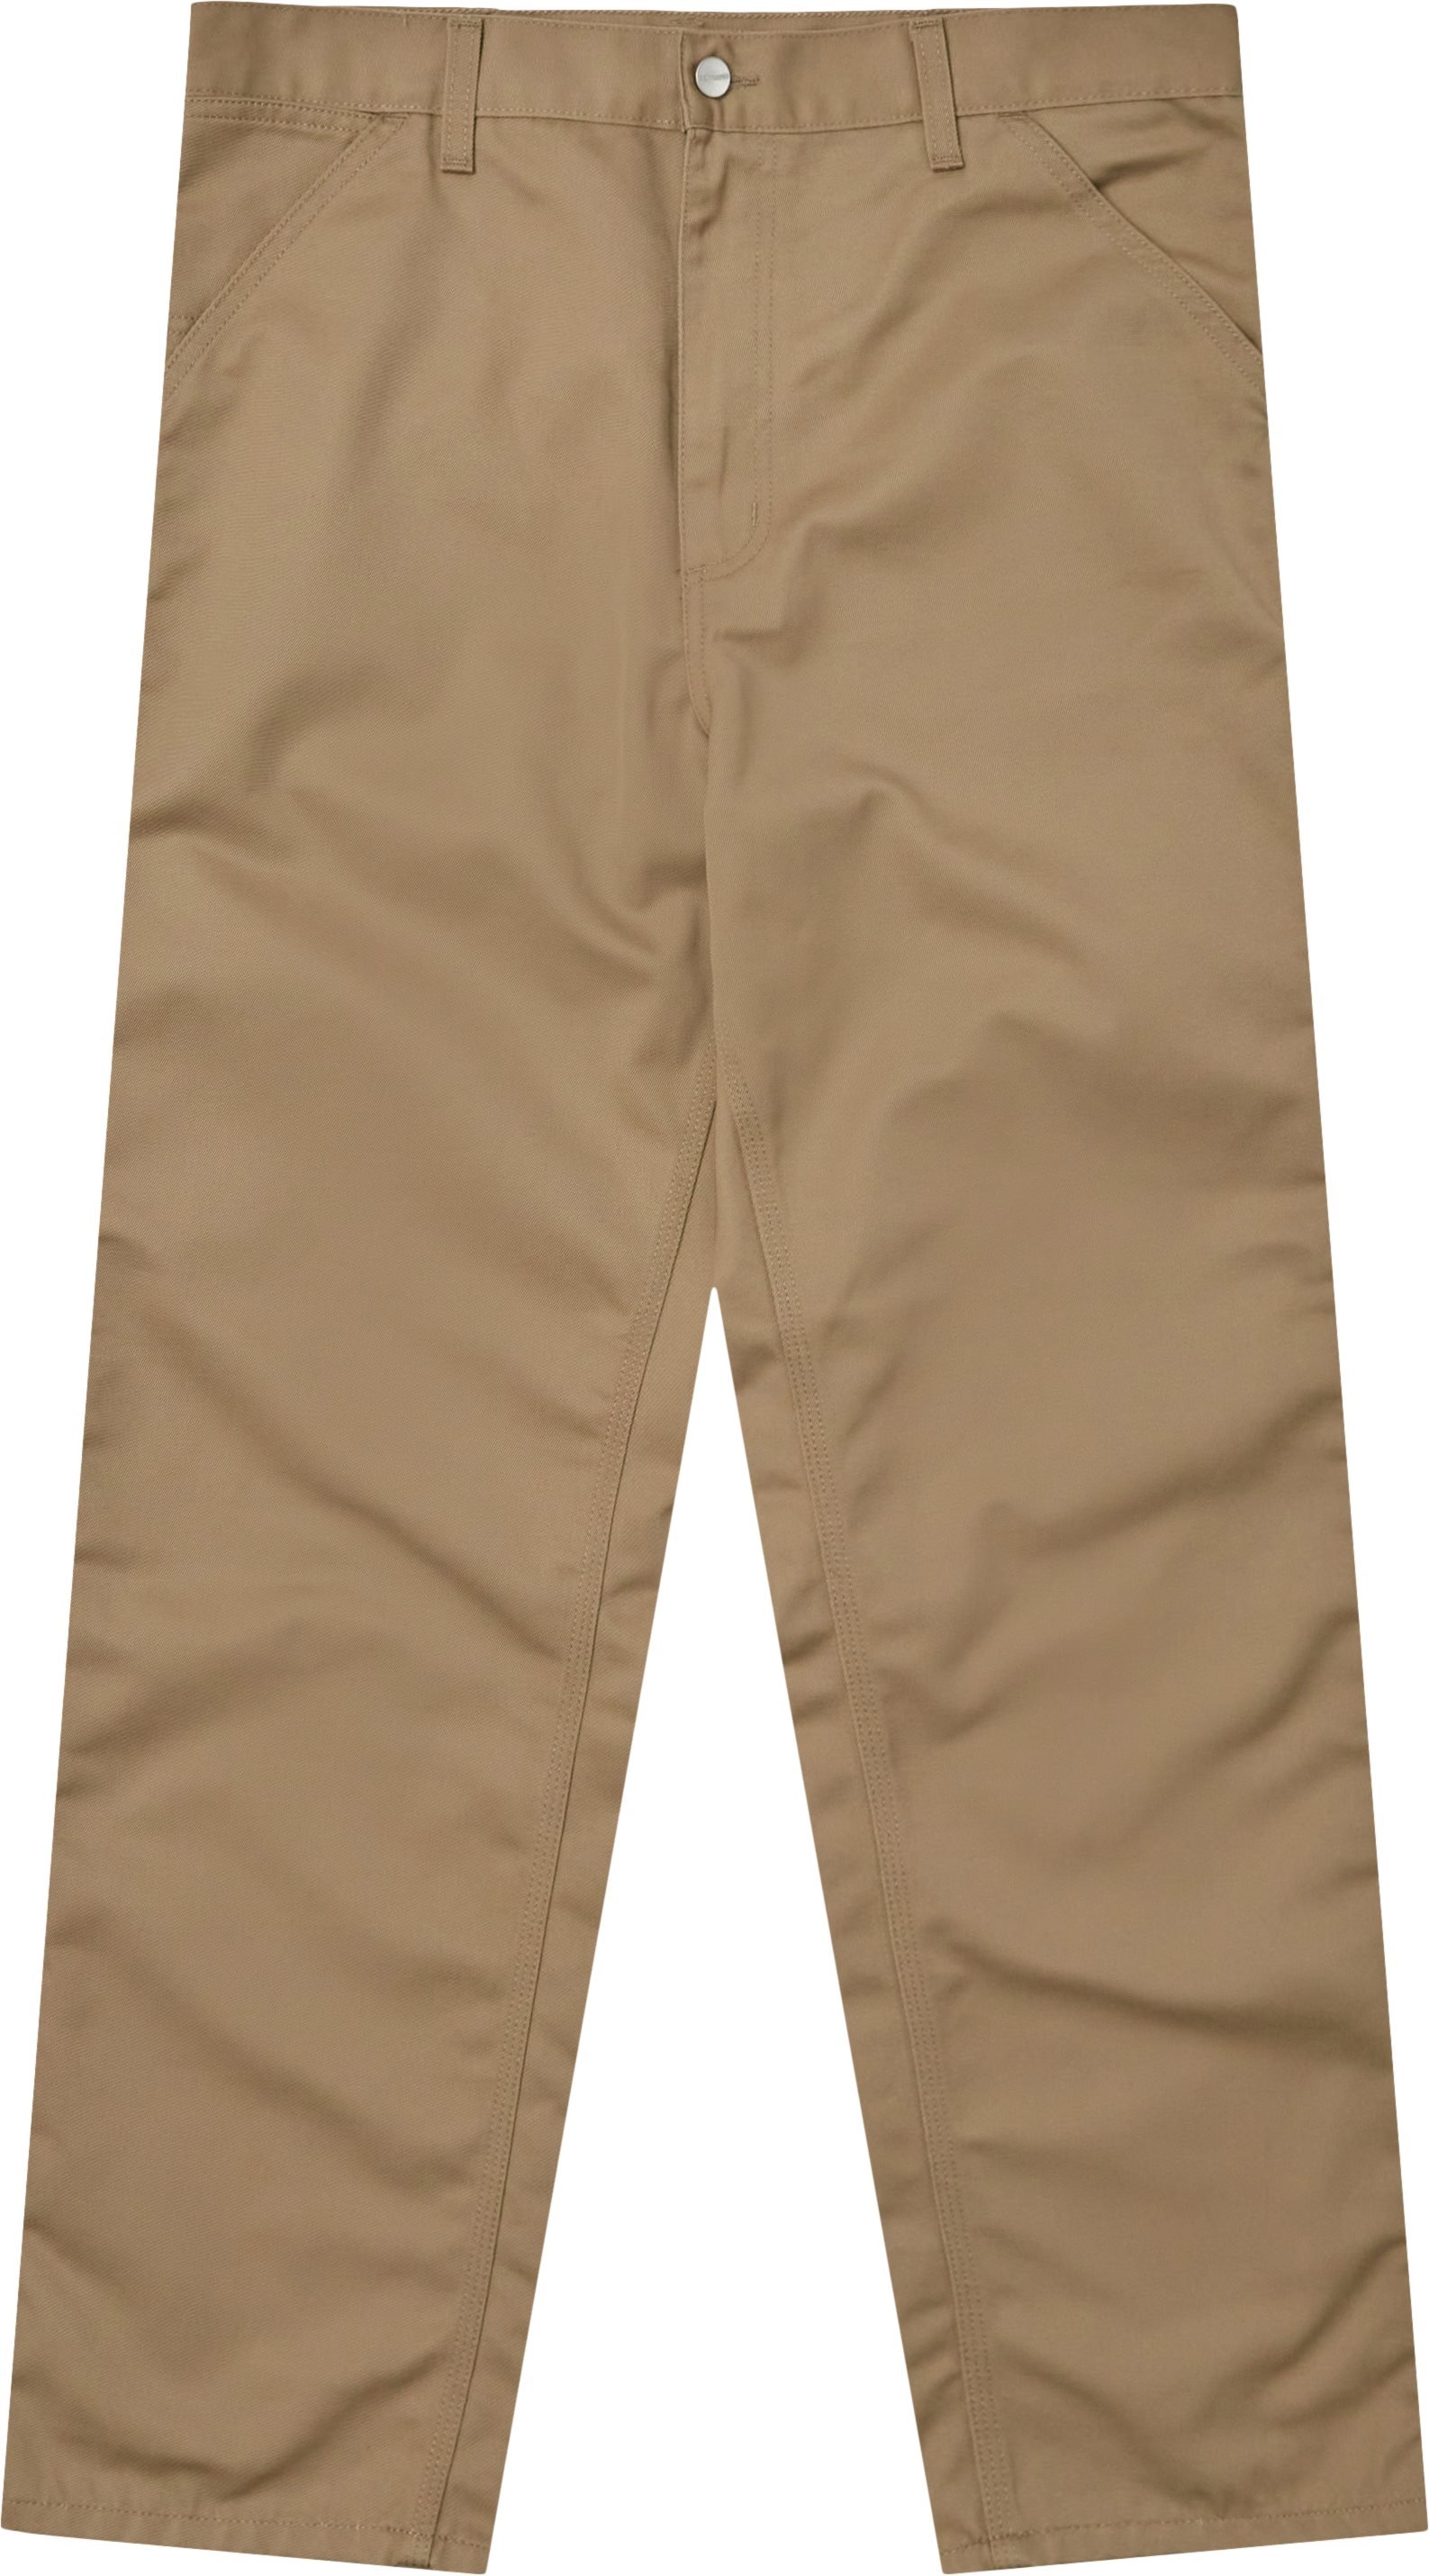 Carhartt WIP Trousers SIMPLE PANT I020075. Sand